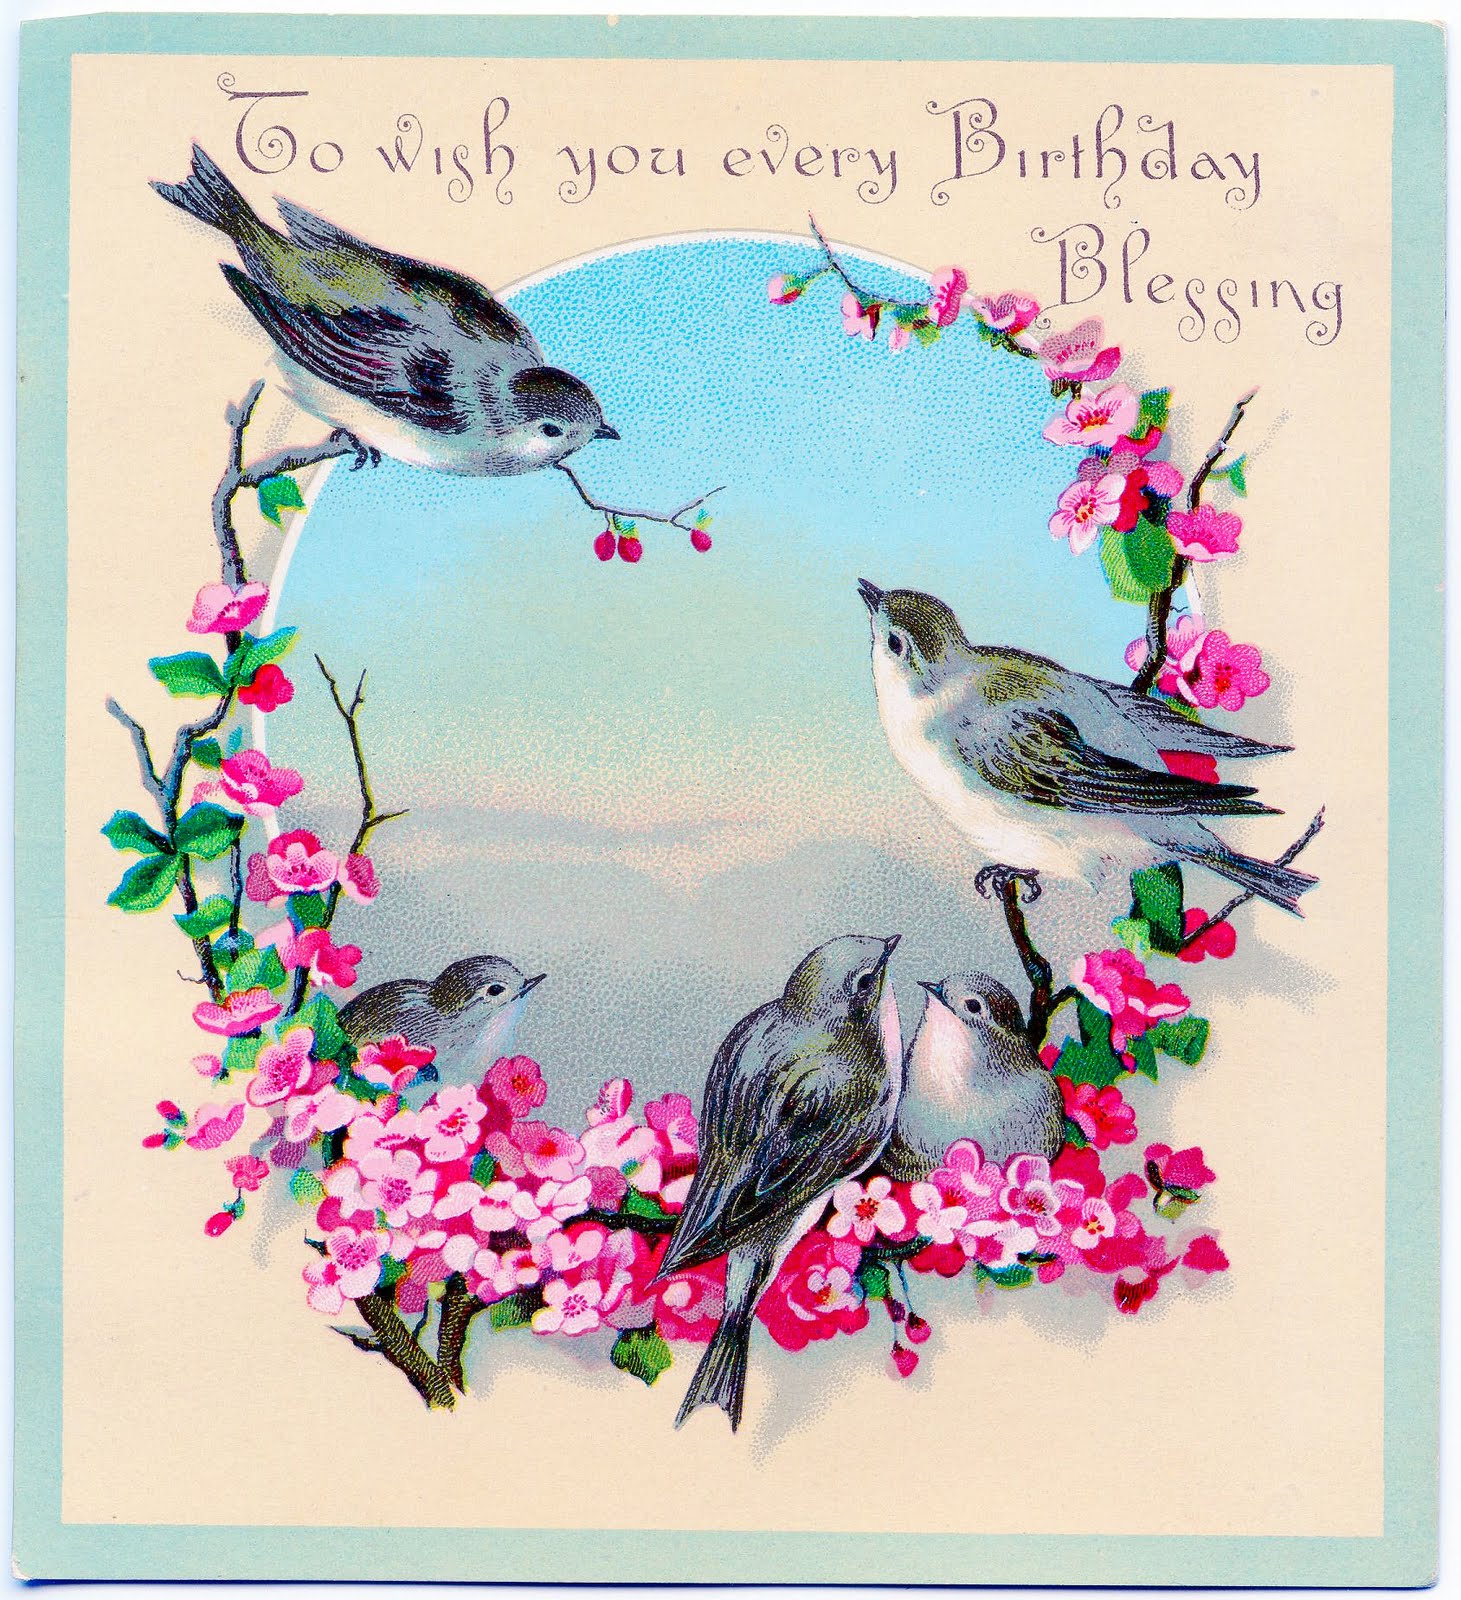 clip art birthday cards for friends - photo #40